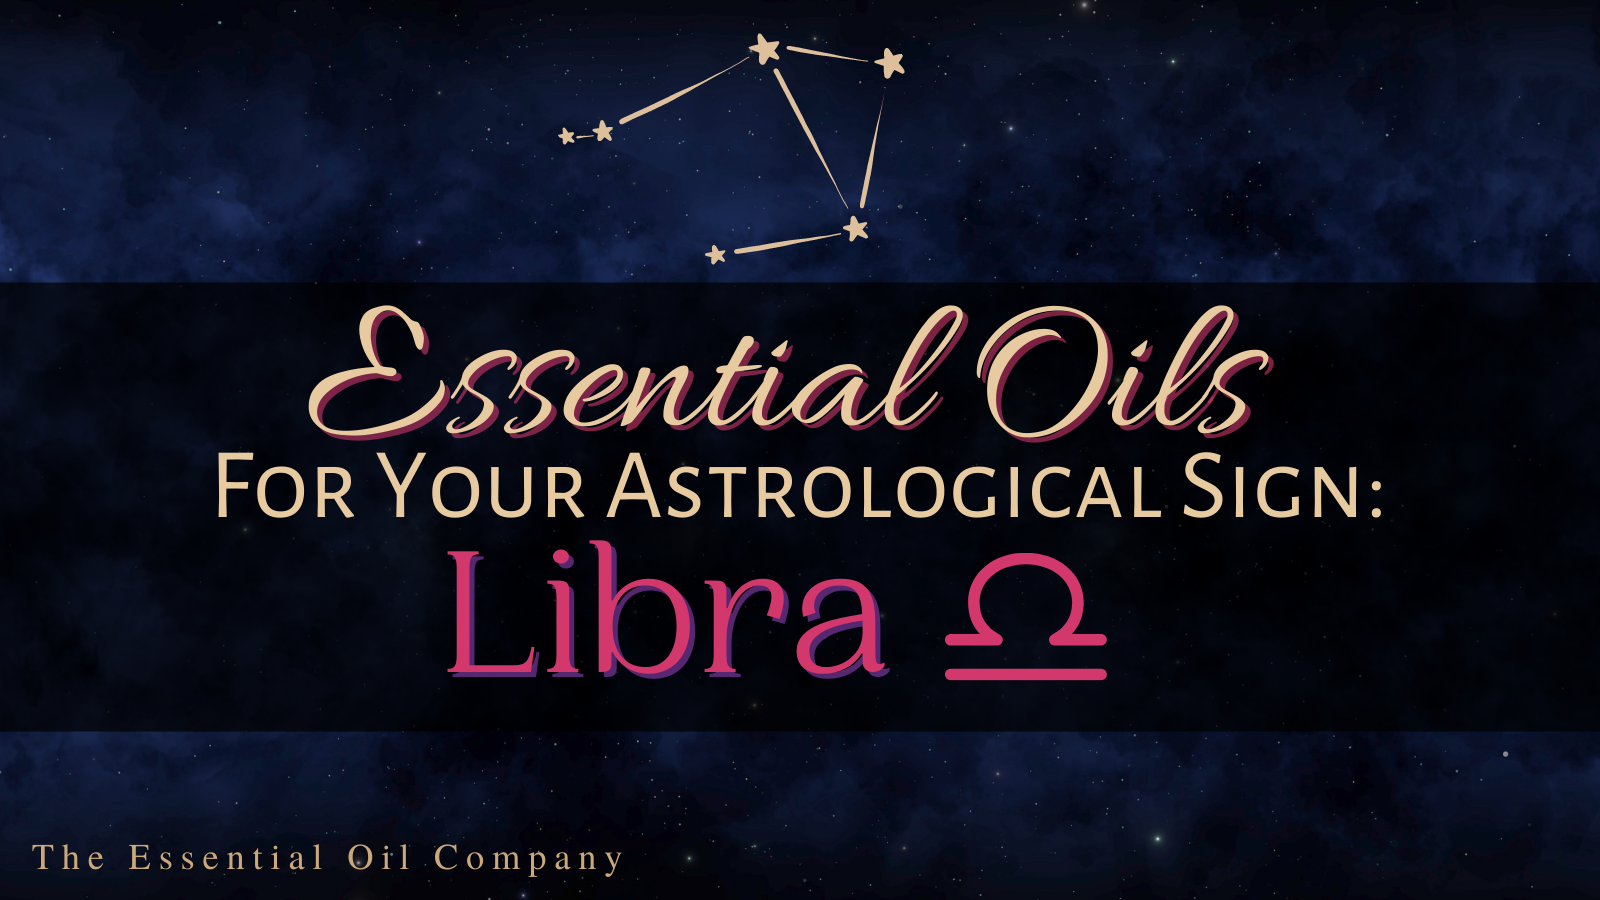 Essential Oils for Your Astrological Sign: Libra